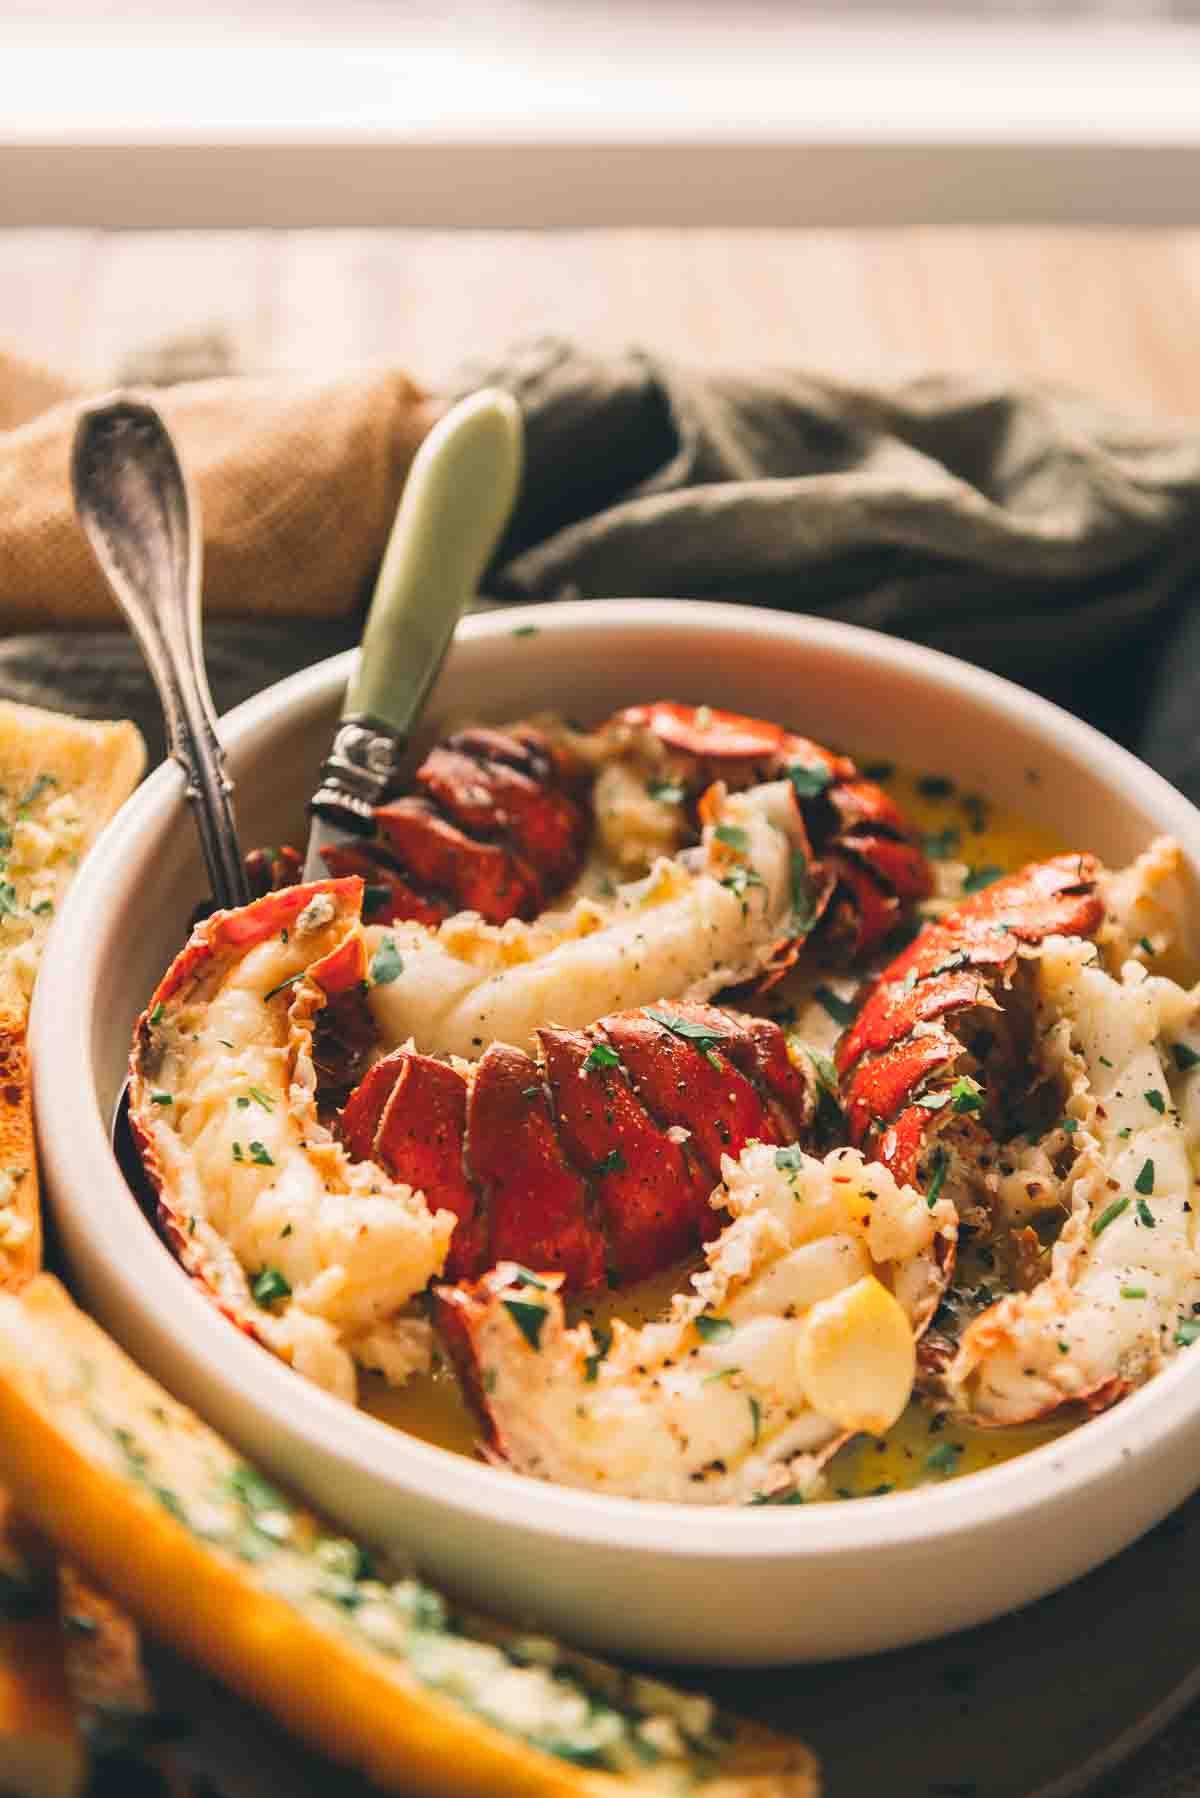 Lobster in a bowl of butter and garlic. 